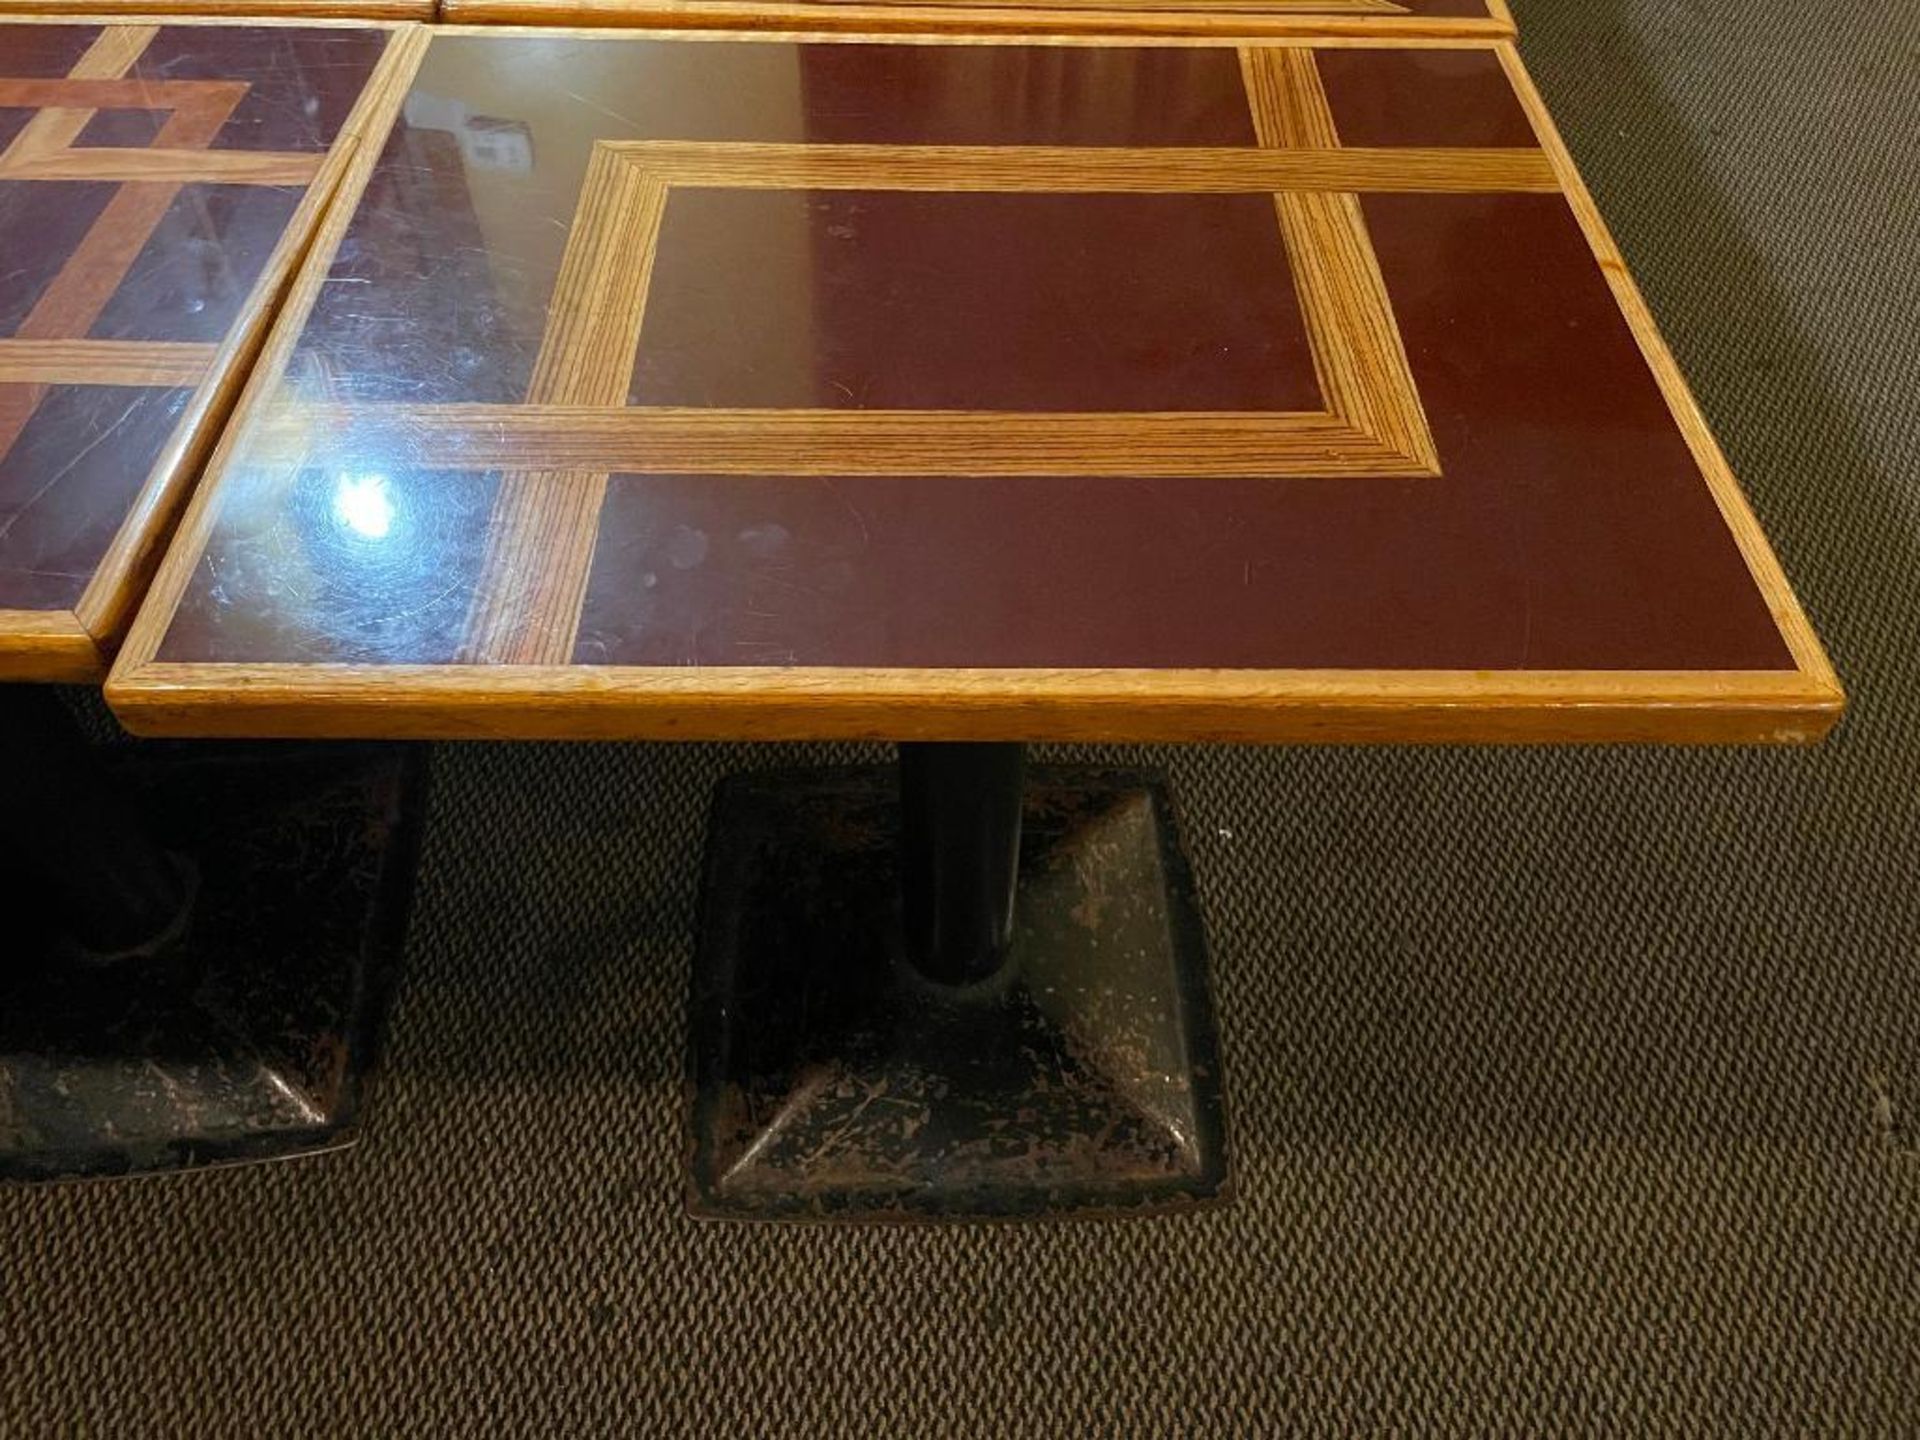 DESCRIPTION: (2) 24" X 30" WOODEN TABLE TOPS W/ BASES SIZE 24" X 30" LOCATION: SEATING THIS LOT IS: